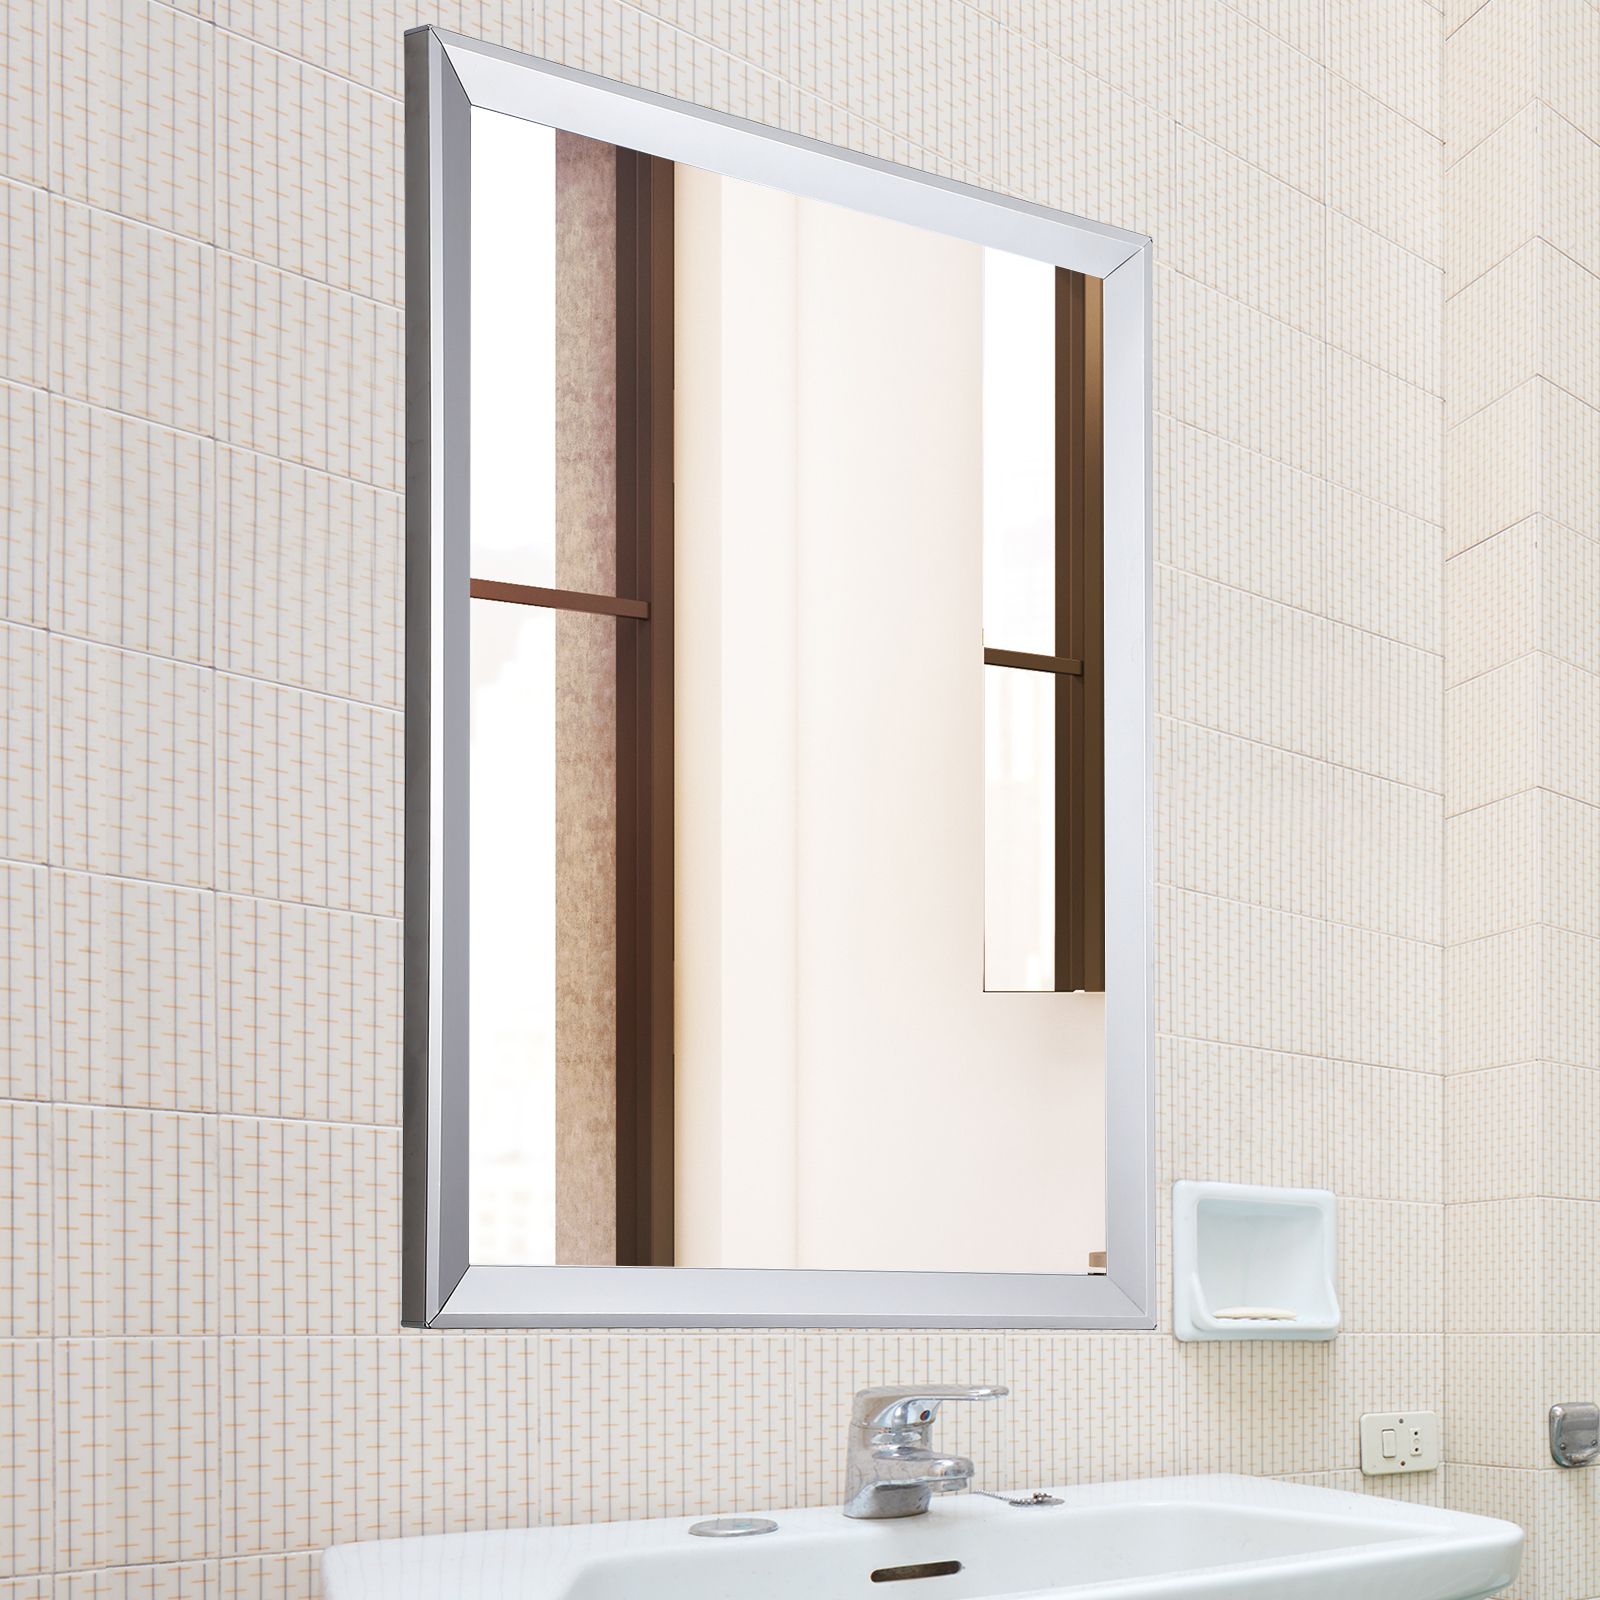 Details About 24"x32" Framed Bathroom Wall Mirror Rectangular Vanity Glass  Beveled Home Decor In Trendy Framing Bathroom Wall Mirrors (View 15 of 20)